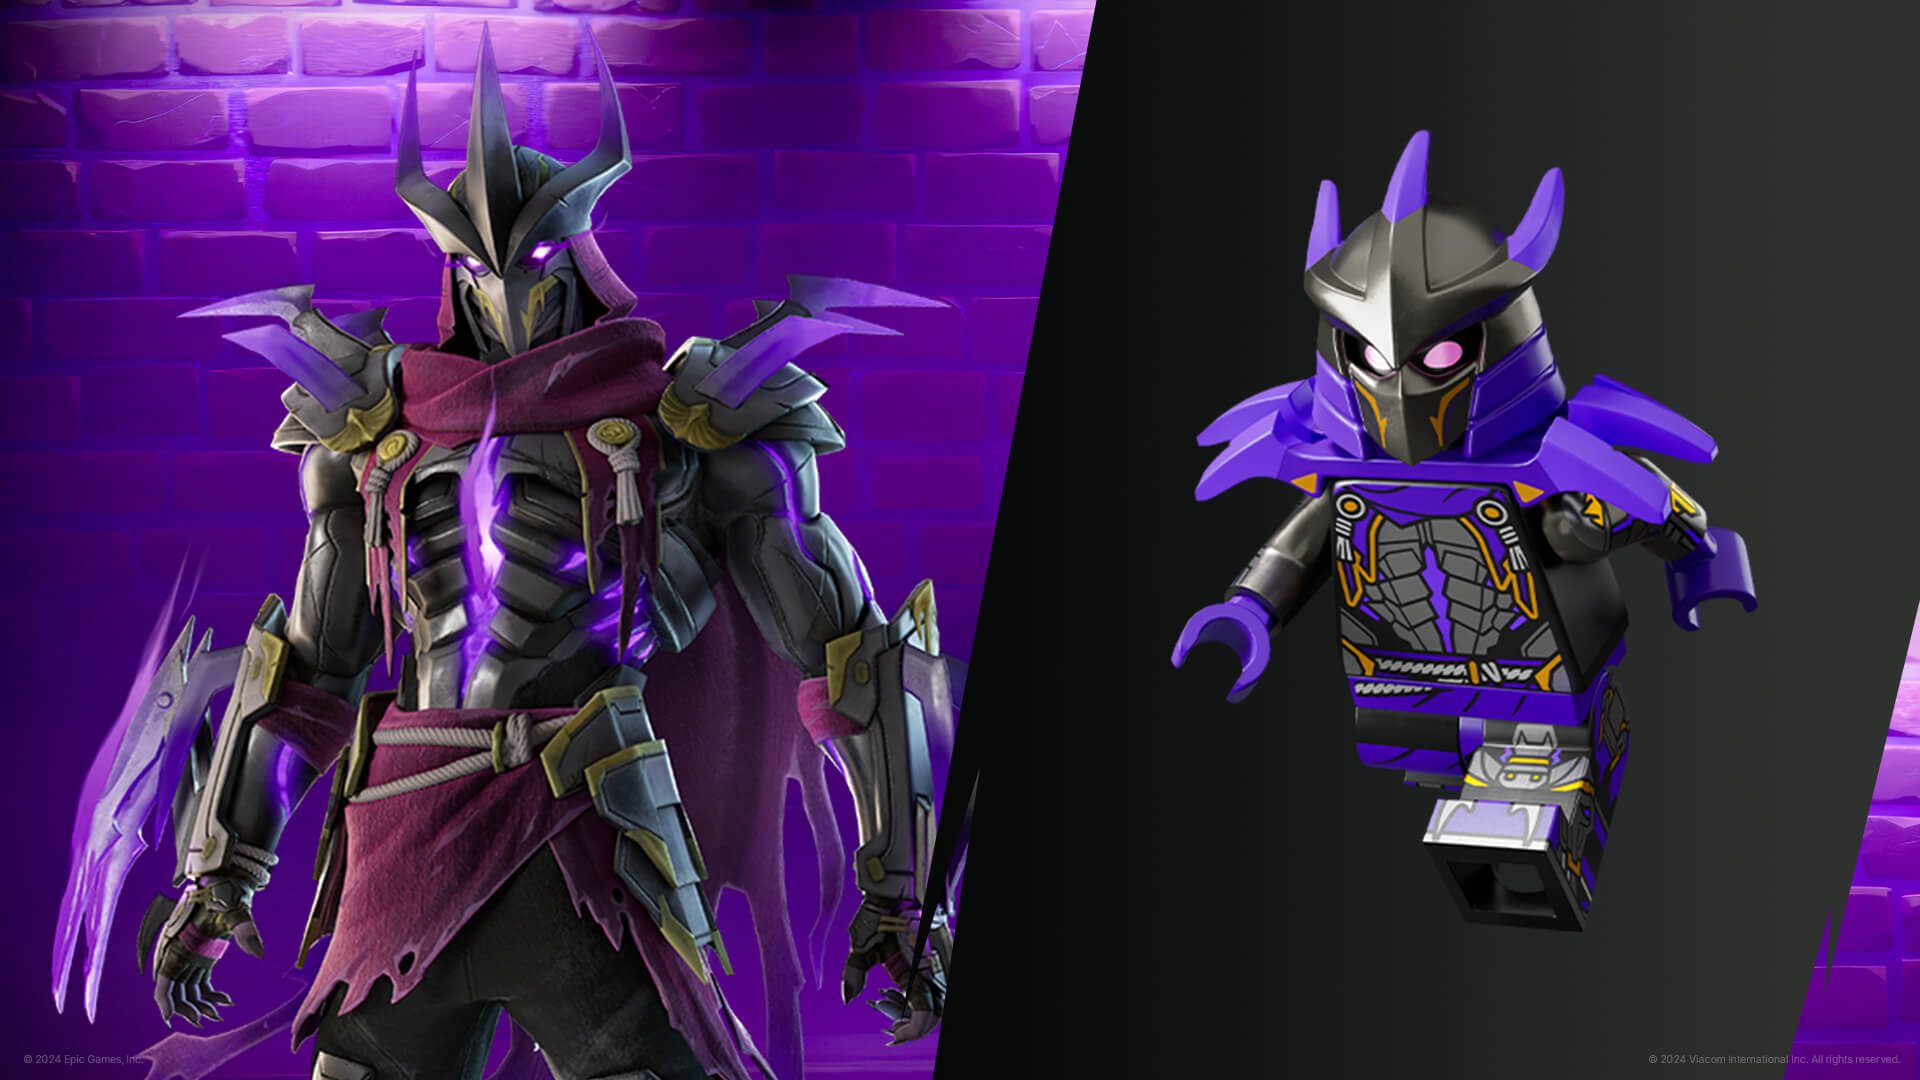 A Fortnite and Lego version of Super Shredder, a masked and armored figure with glowing purple highlights